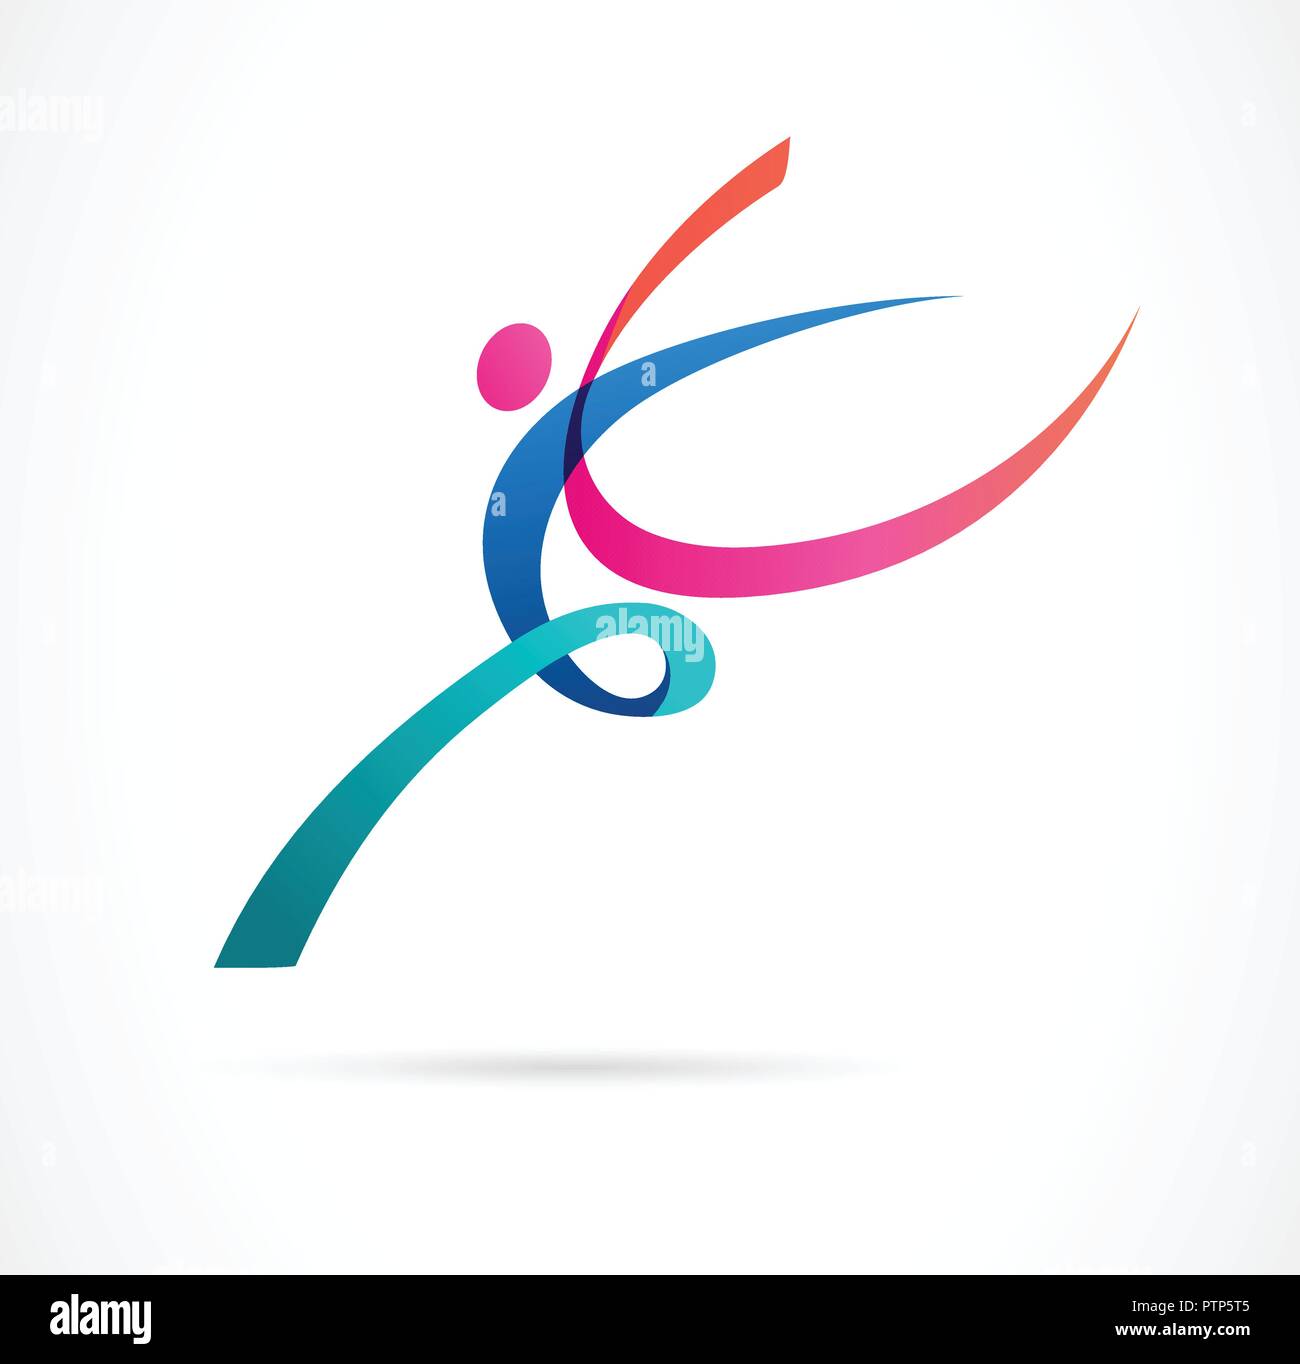 Abstract human figure logo design. Gym, fitness, running trainer vector ...